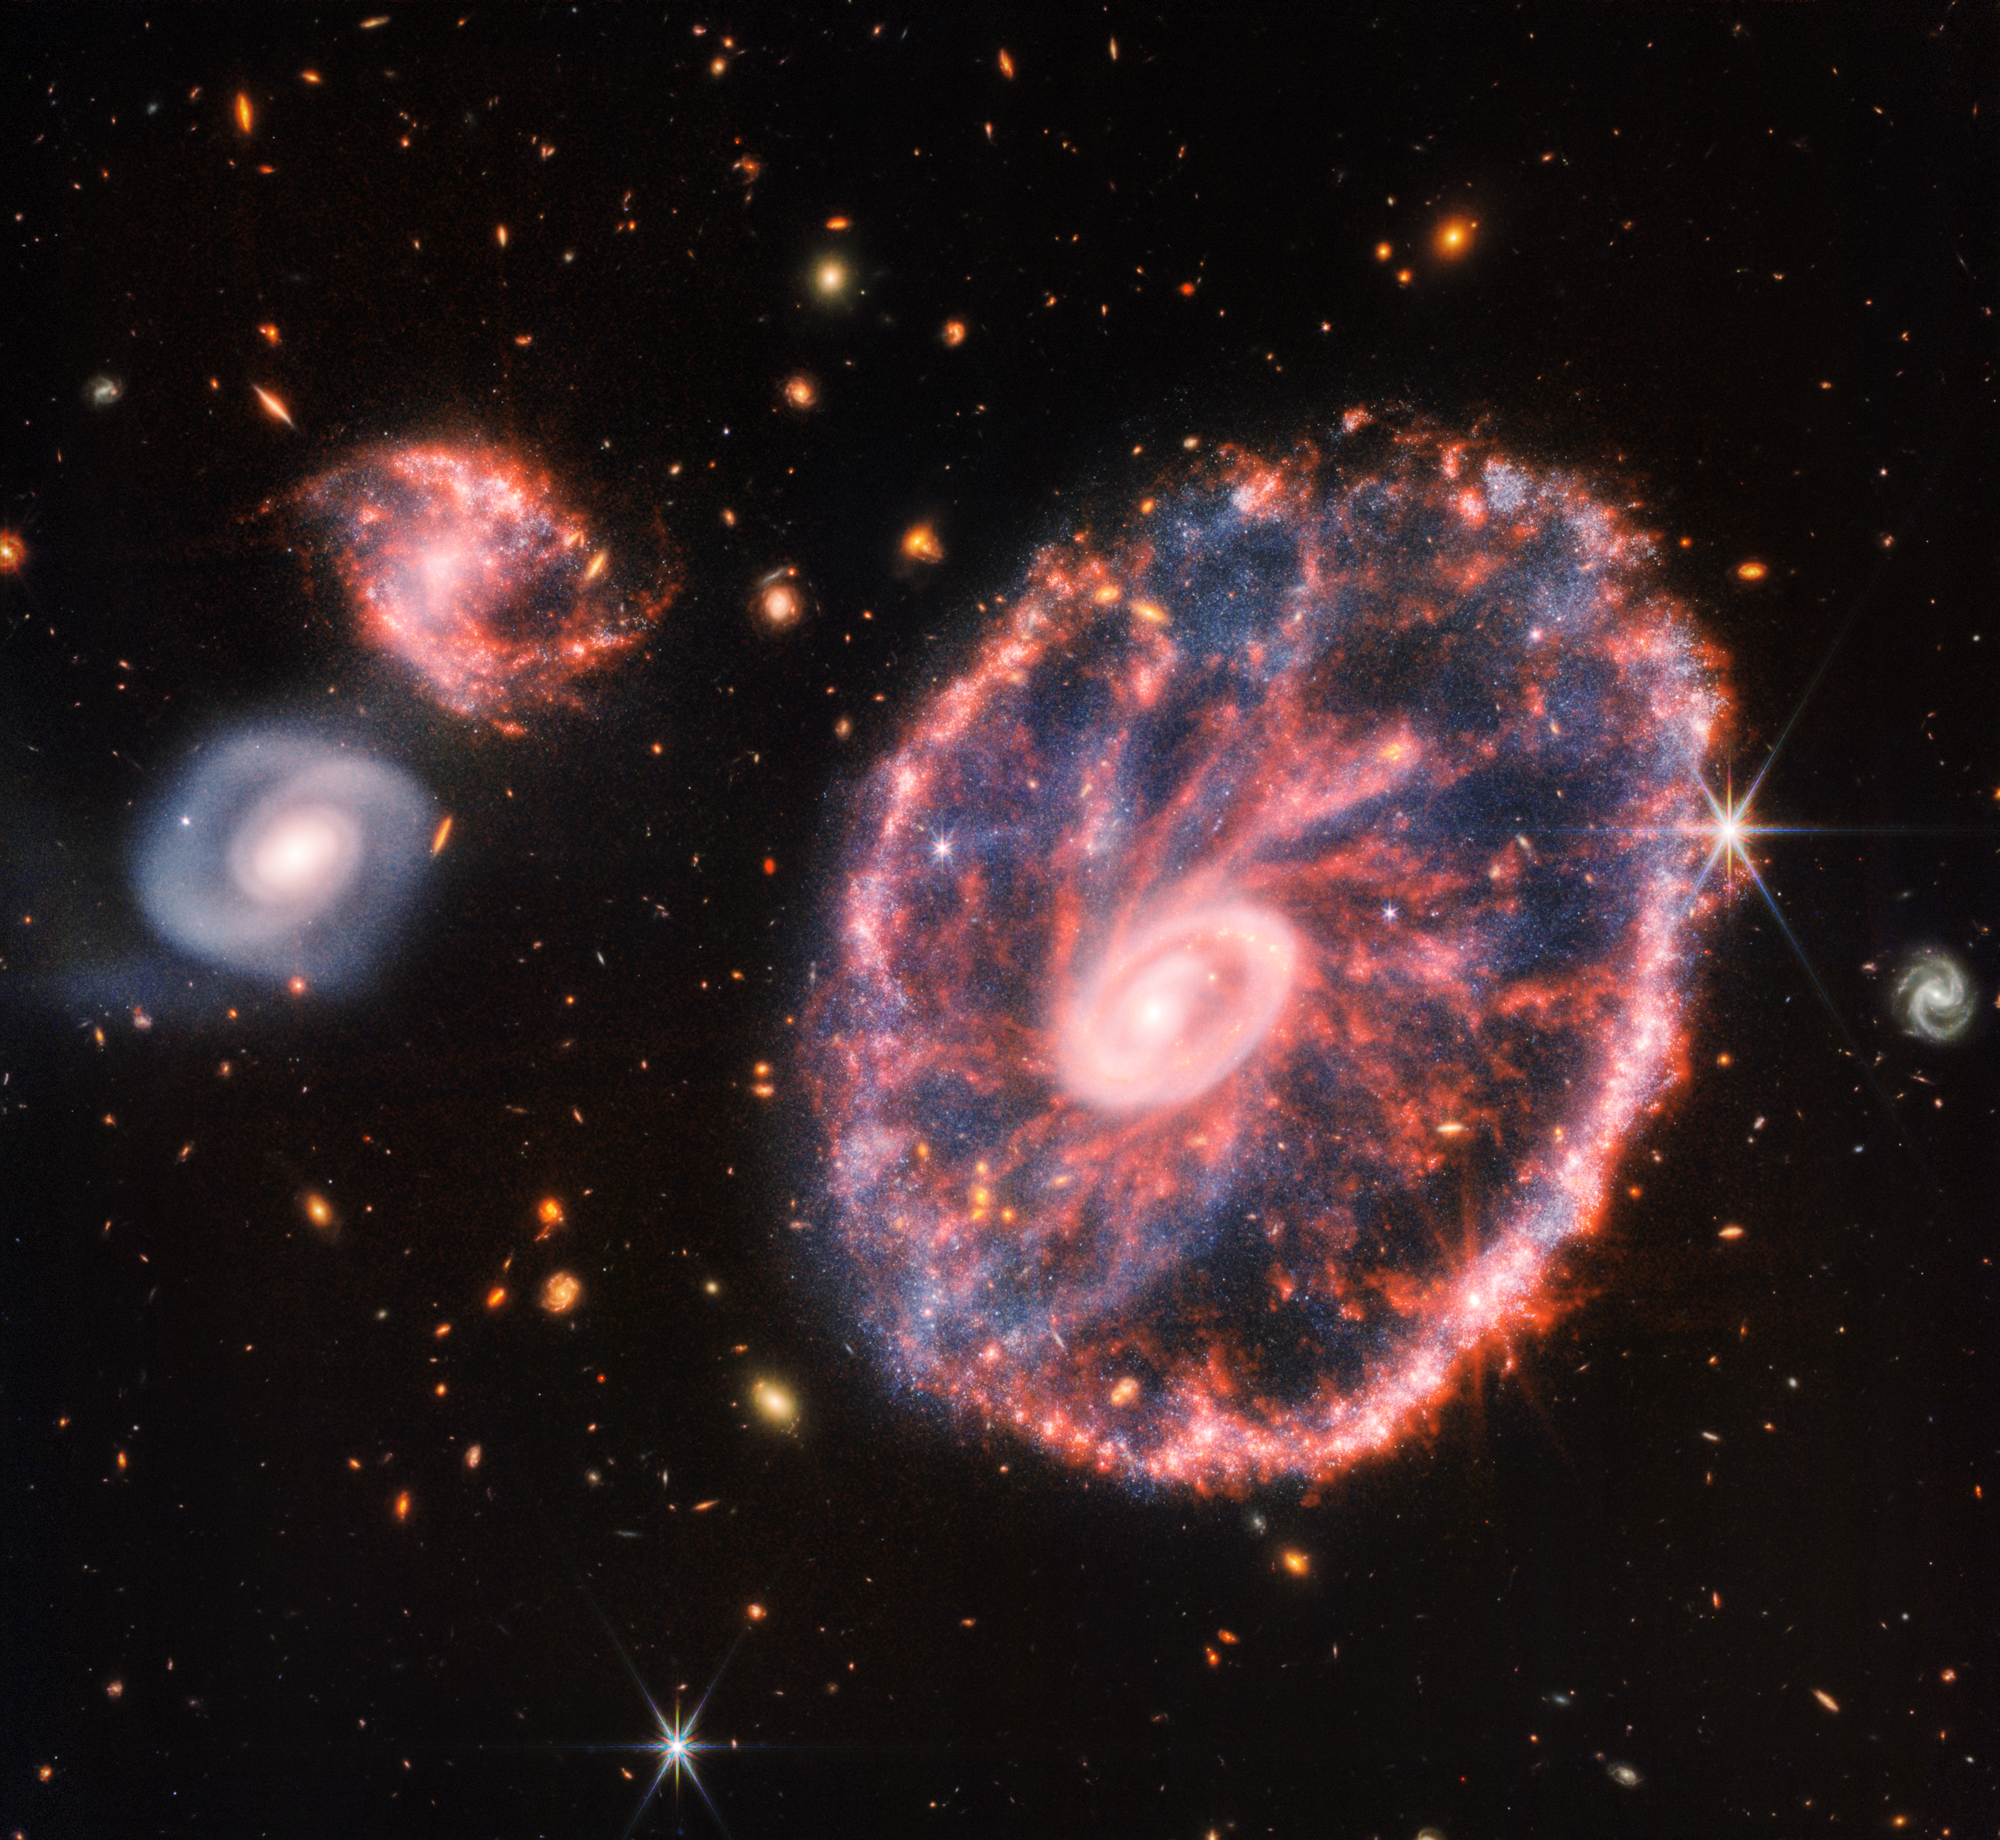 The right side of the galaxy is a large pink, speckled wheel with an inner oval, with dusty blue in between, and the left side is two spiral galaxies about the same size. Credits: NASA, ESA, CSA, STScI.